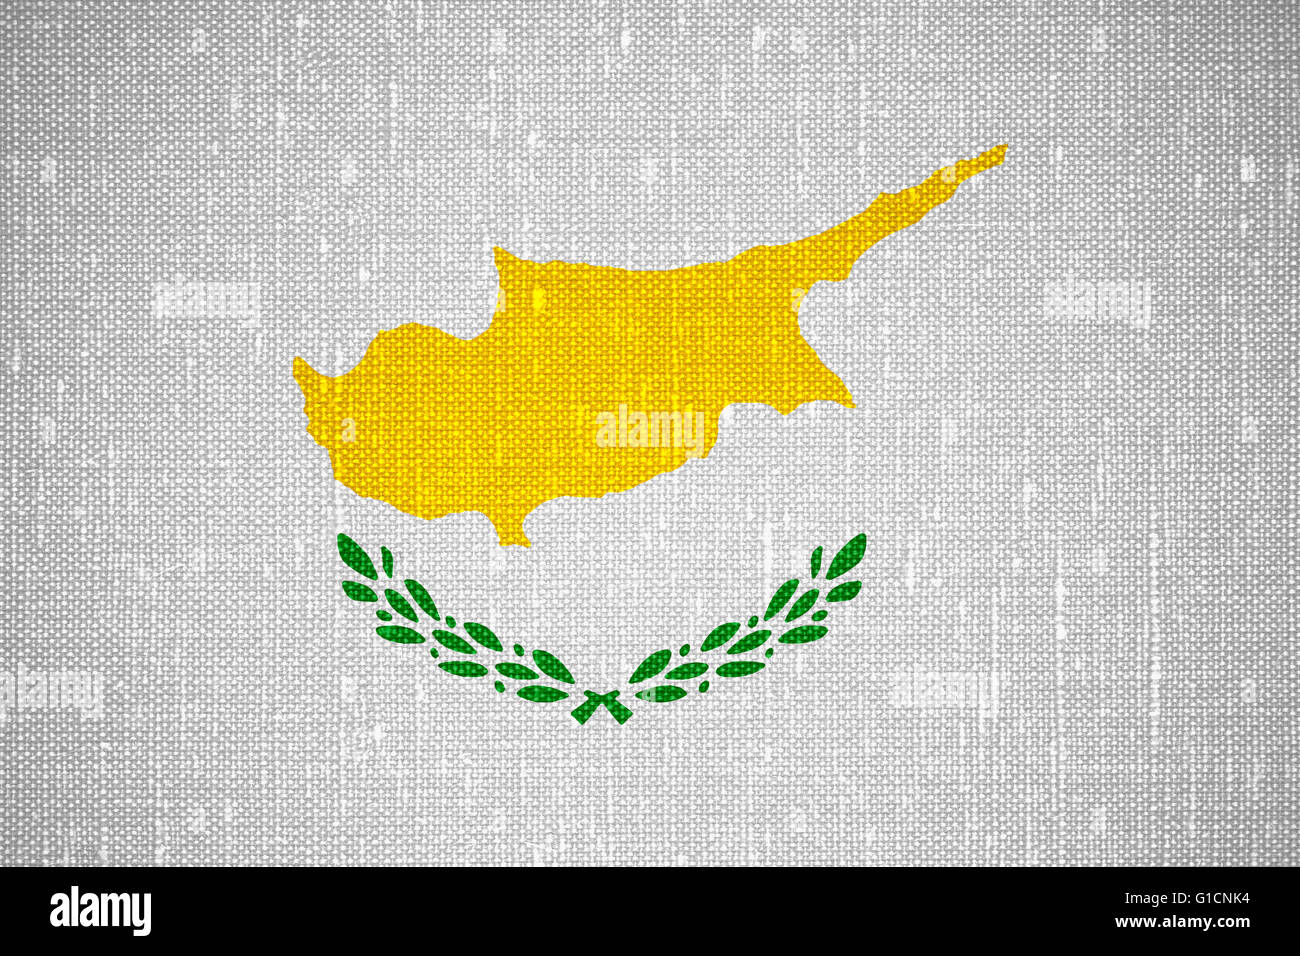 flag of Cyprus or Cypriot banner on cnavas background Stock Photo